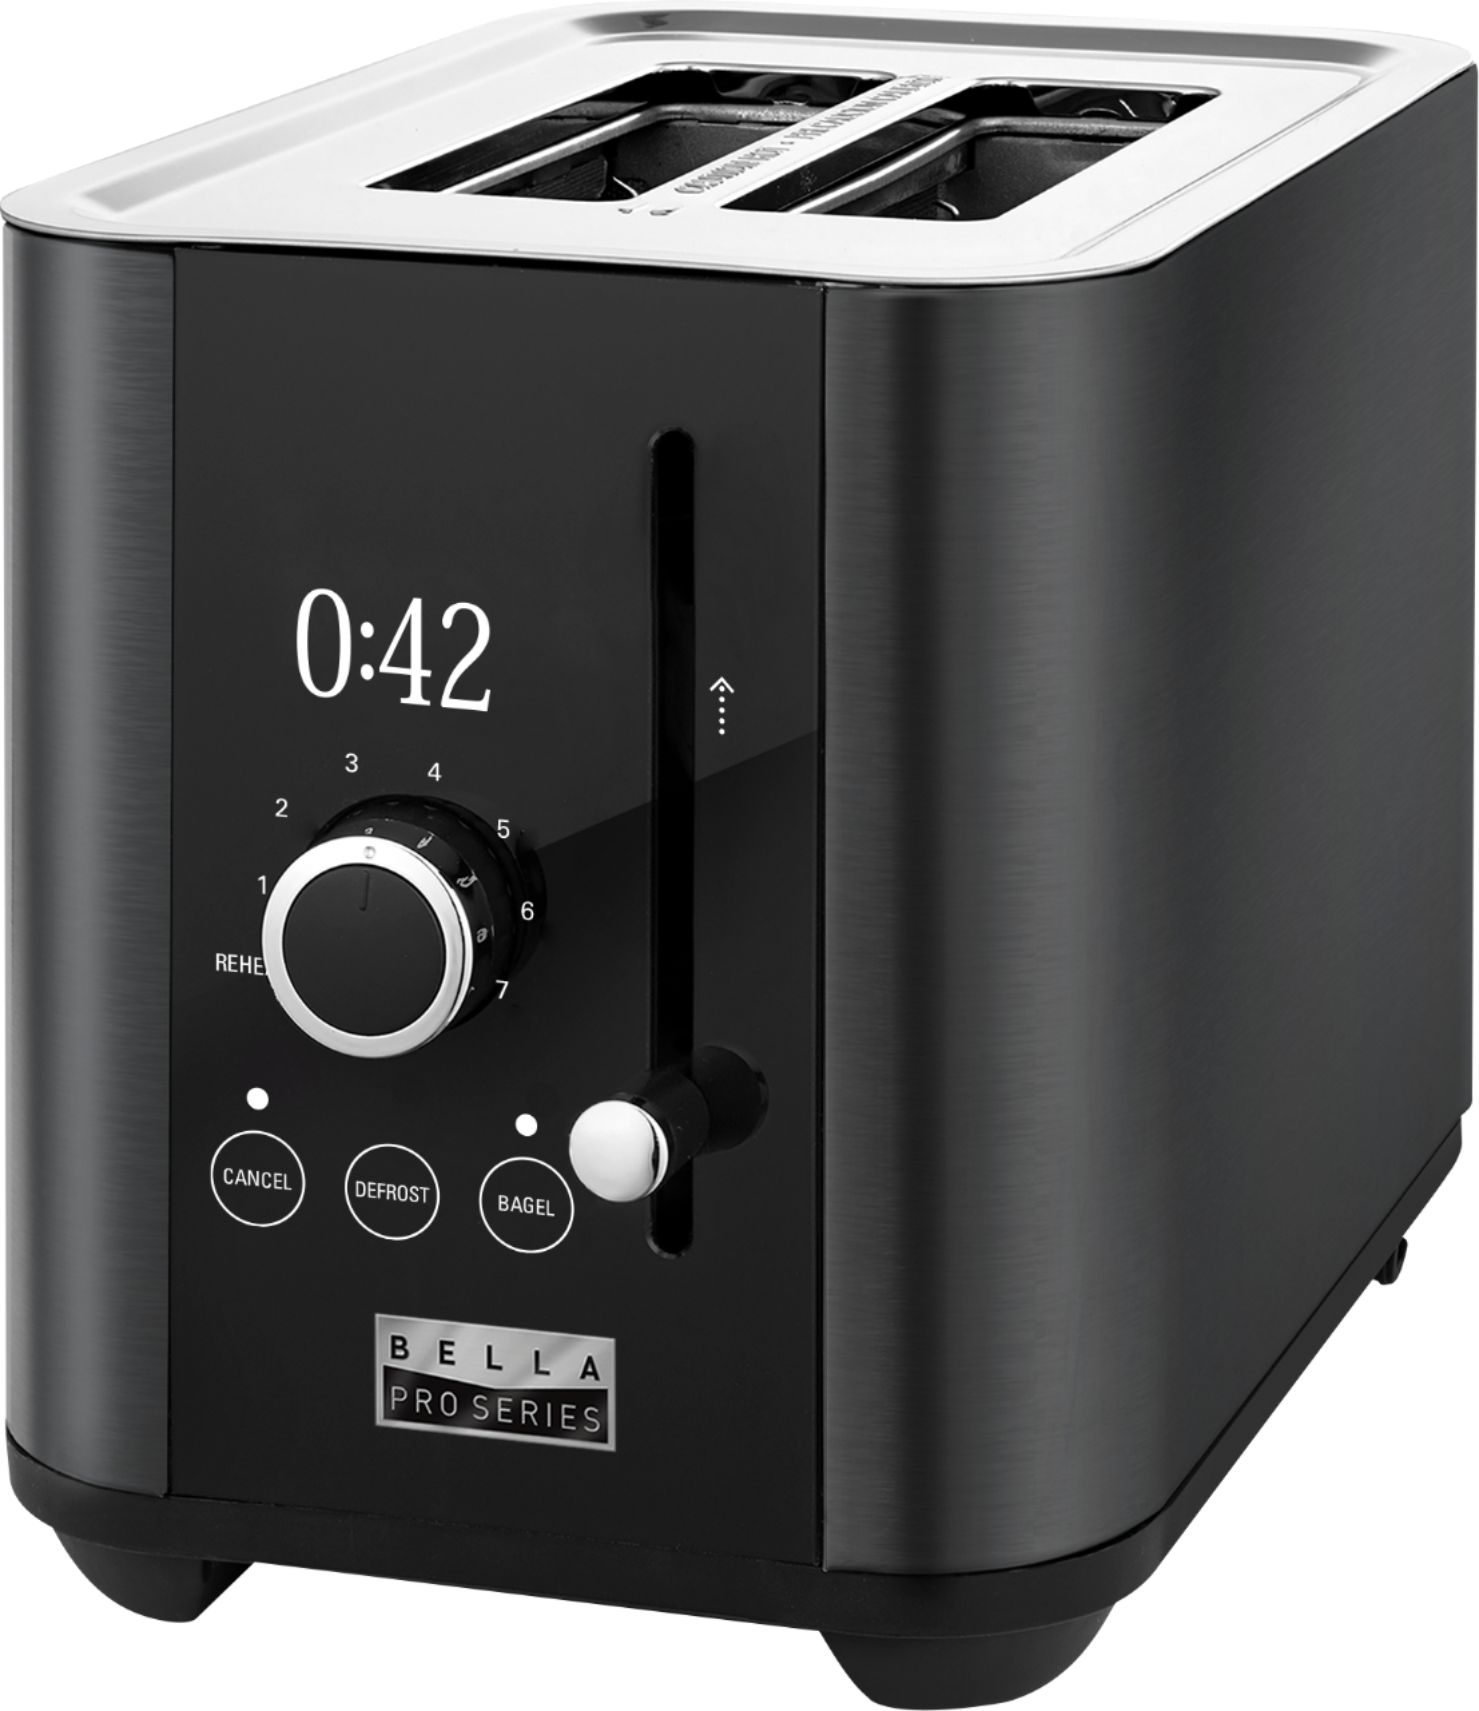 This Bella 2-slice toaster has a digital touchscreen interface, now $25  (50% off)